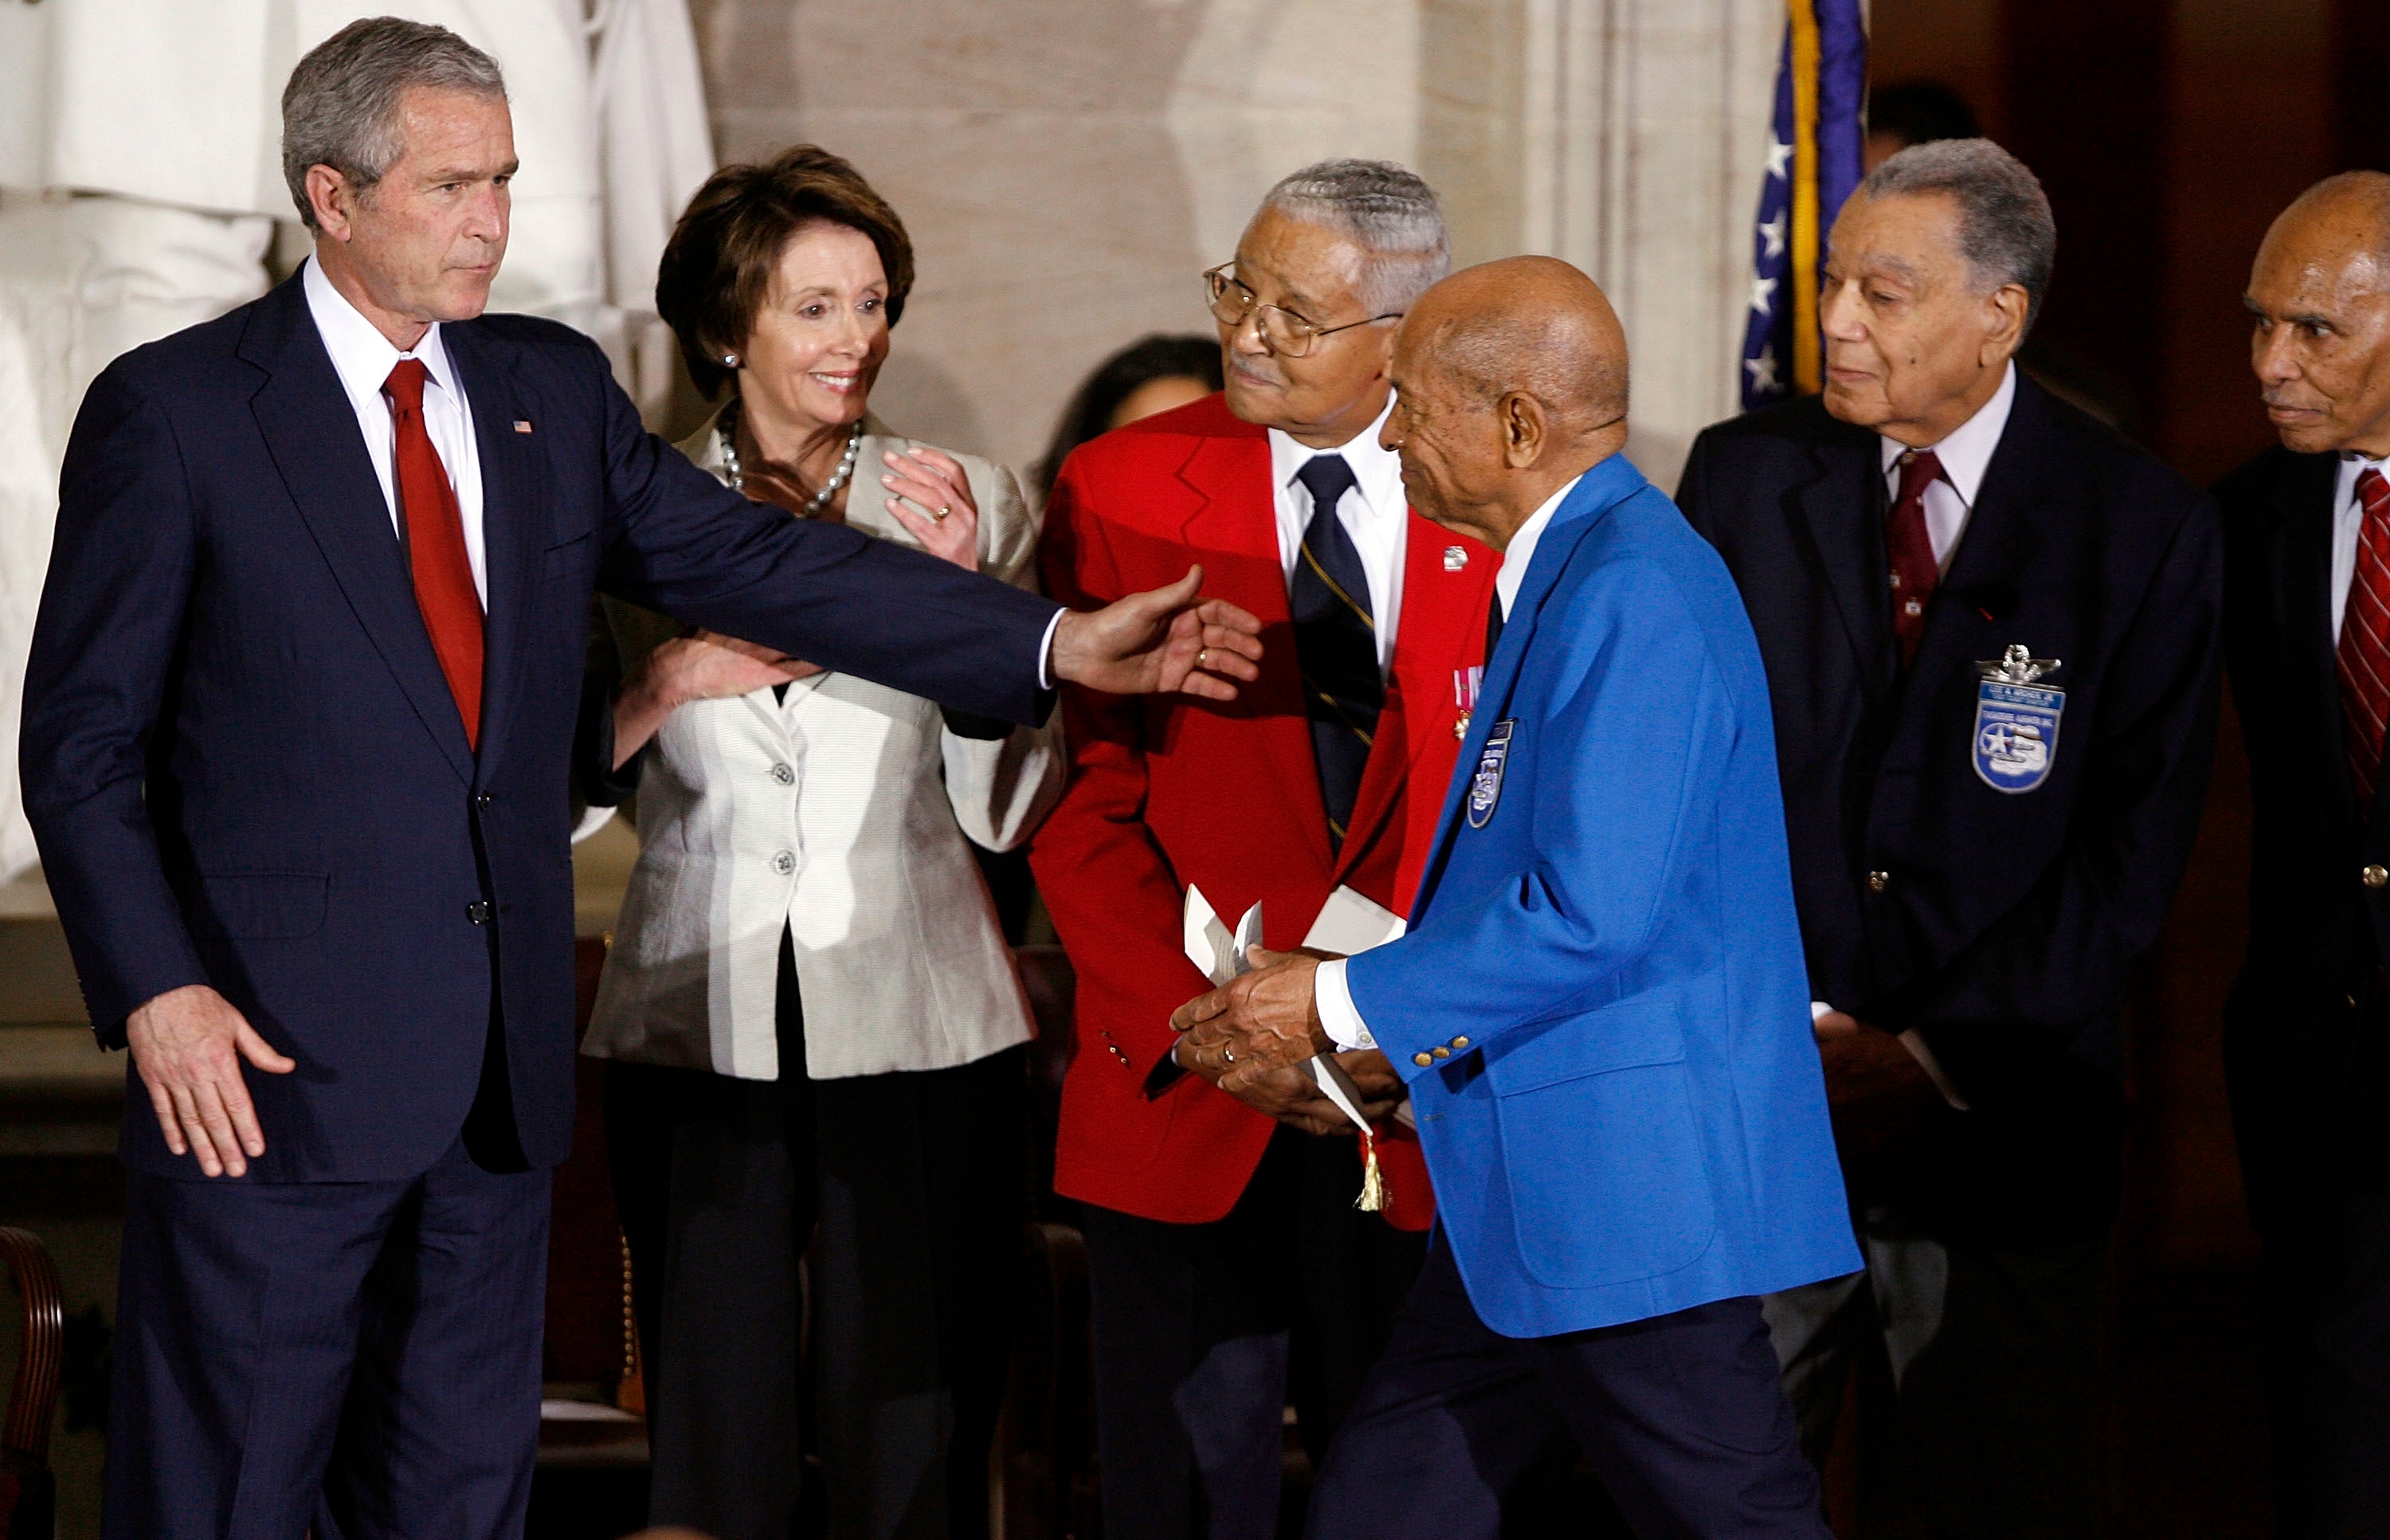 In 2007, he and other surviving members of the Tuskegee Airmen were presented with the congressional gold medal by George W Bush